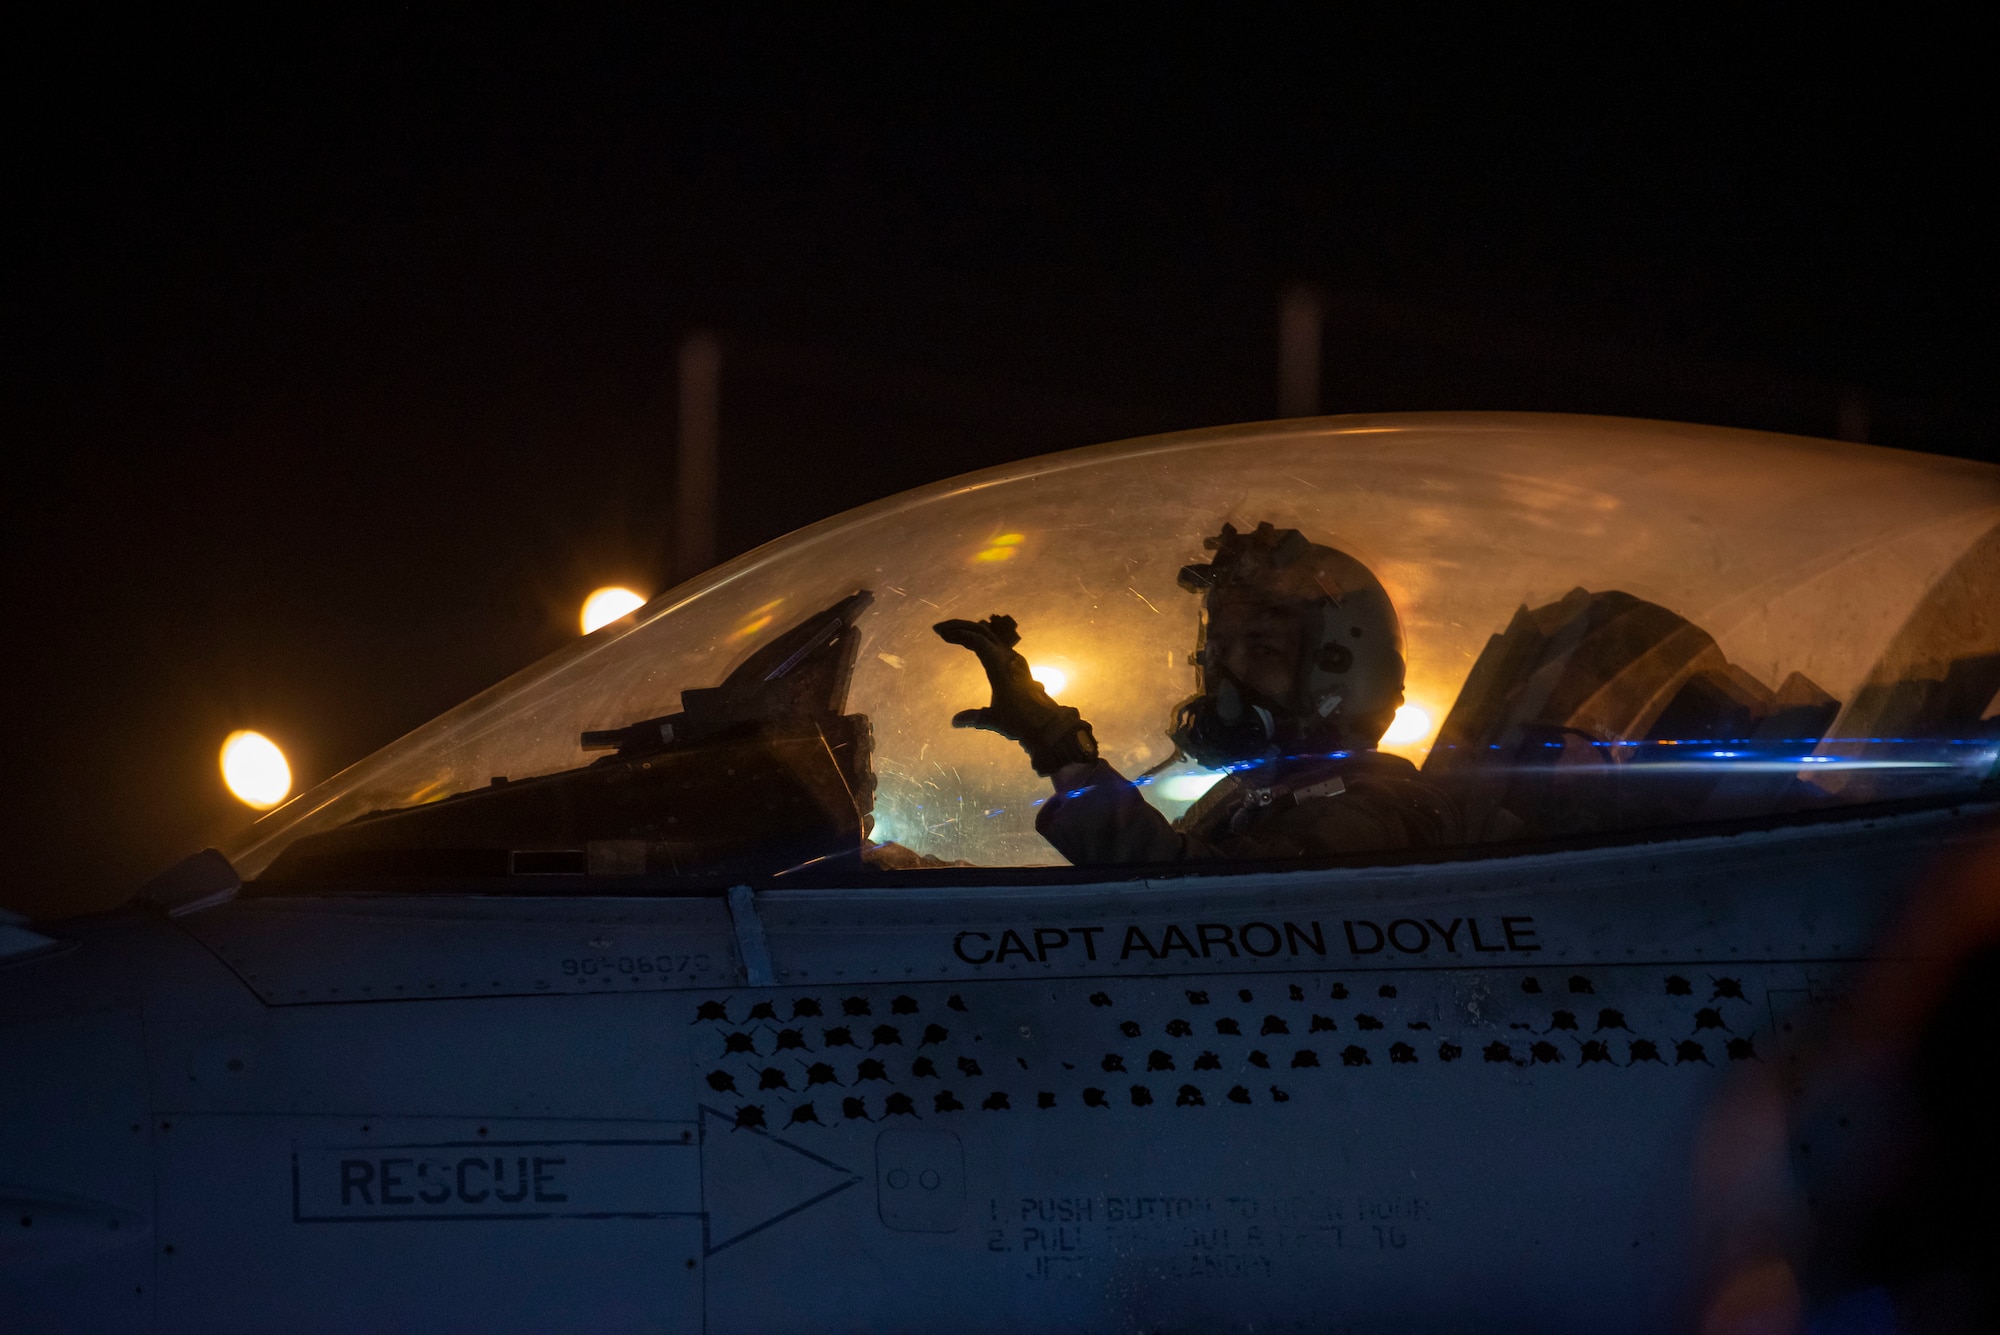 A pilot in the cockpit of an F-16 Fighting Falcon displays a hand gesture.